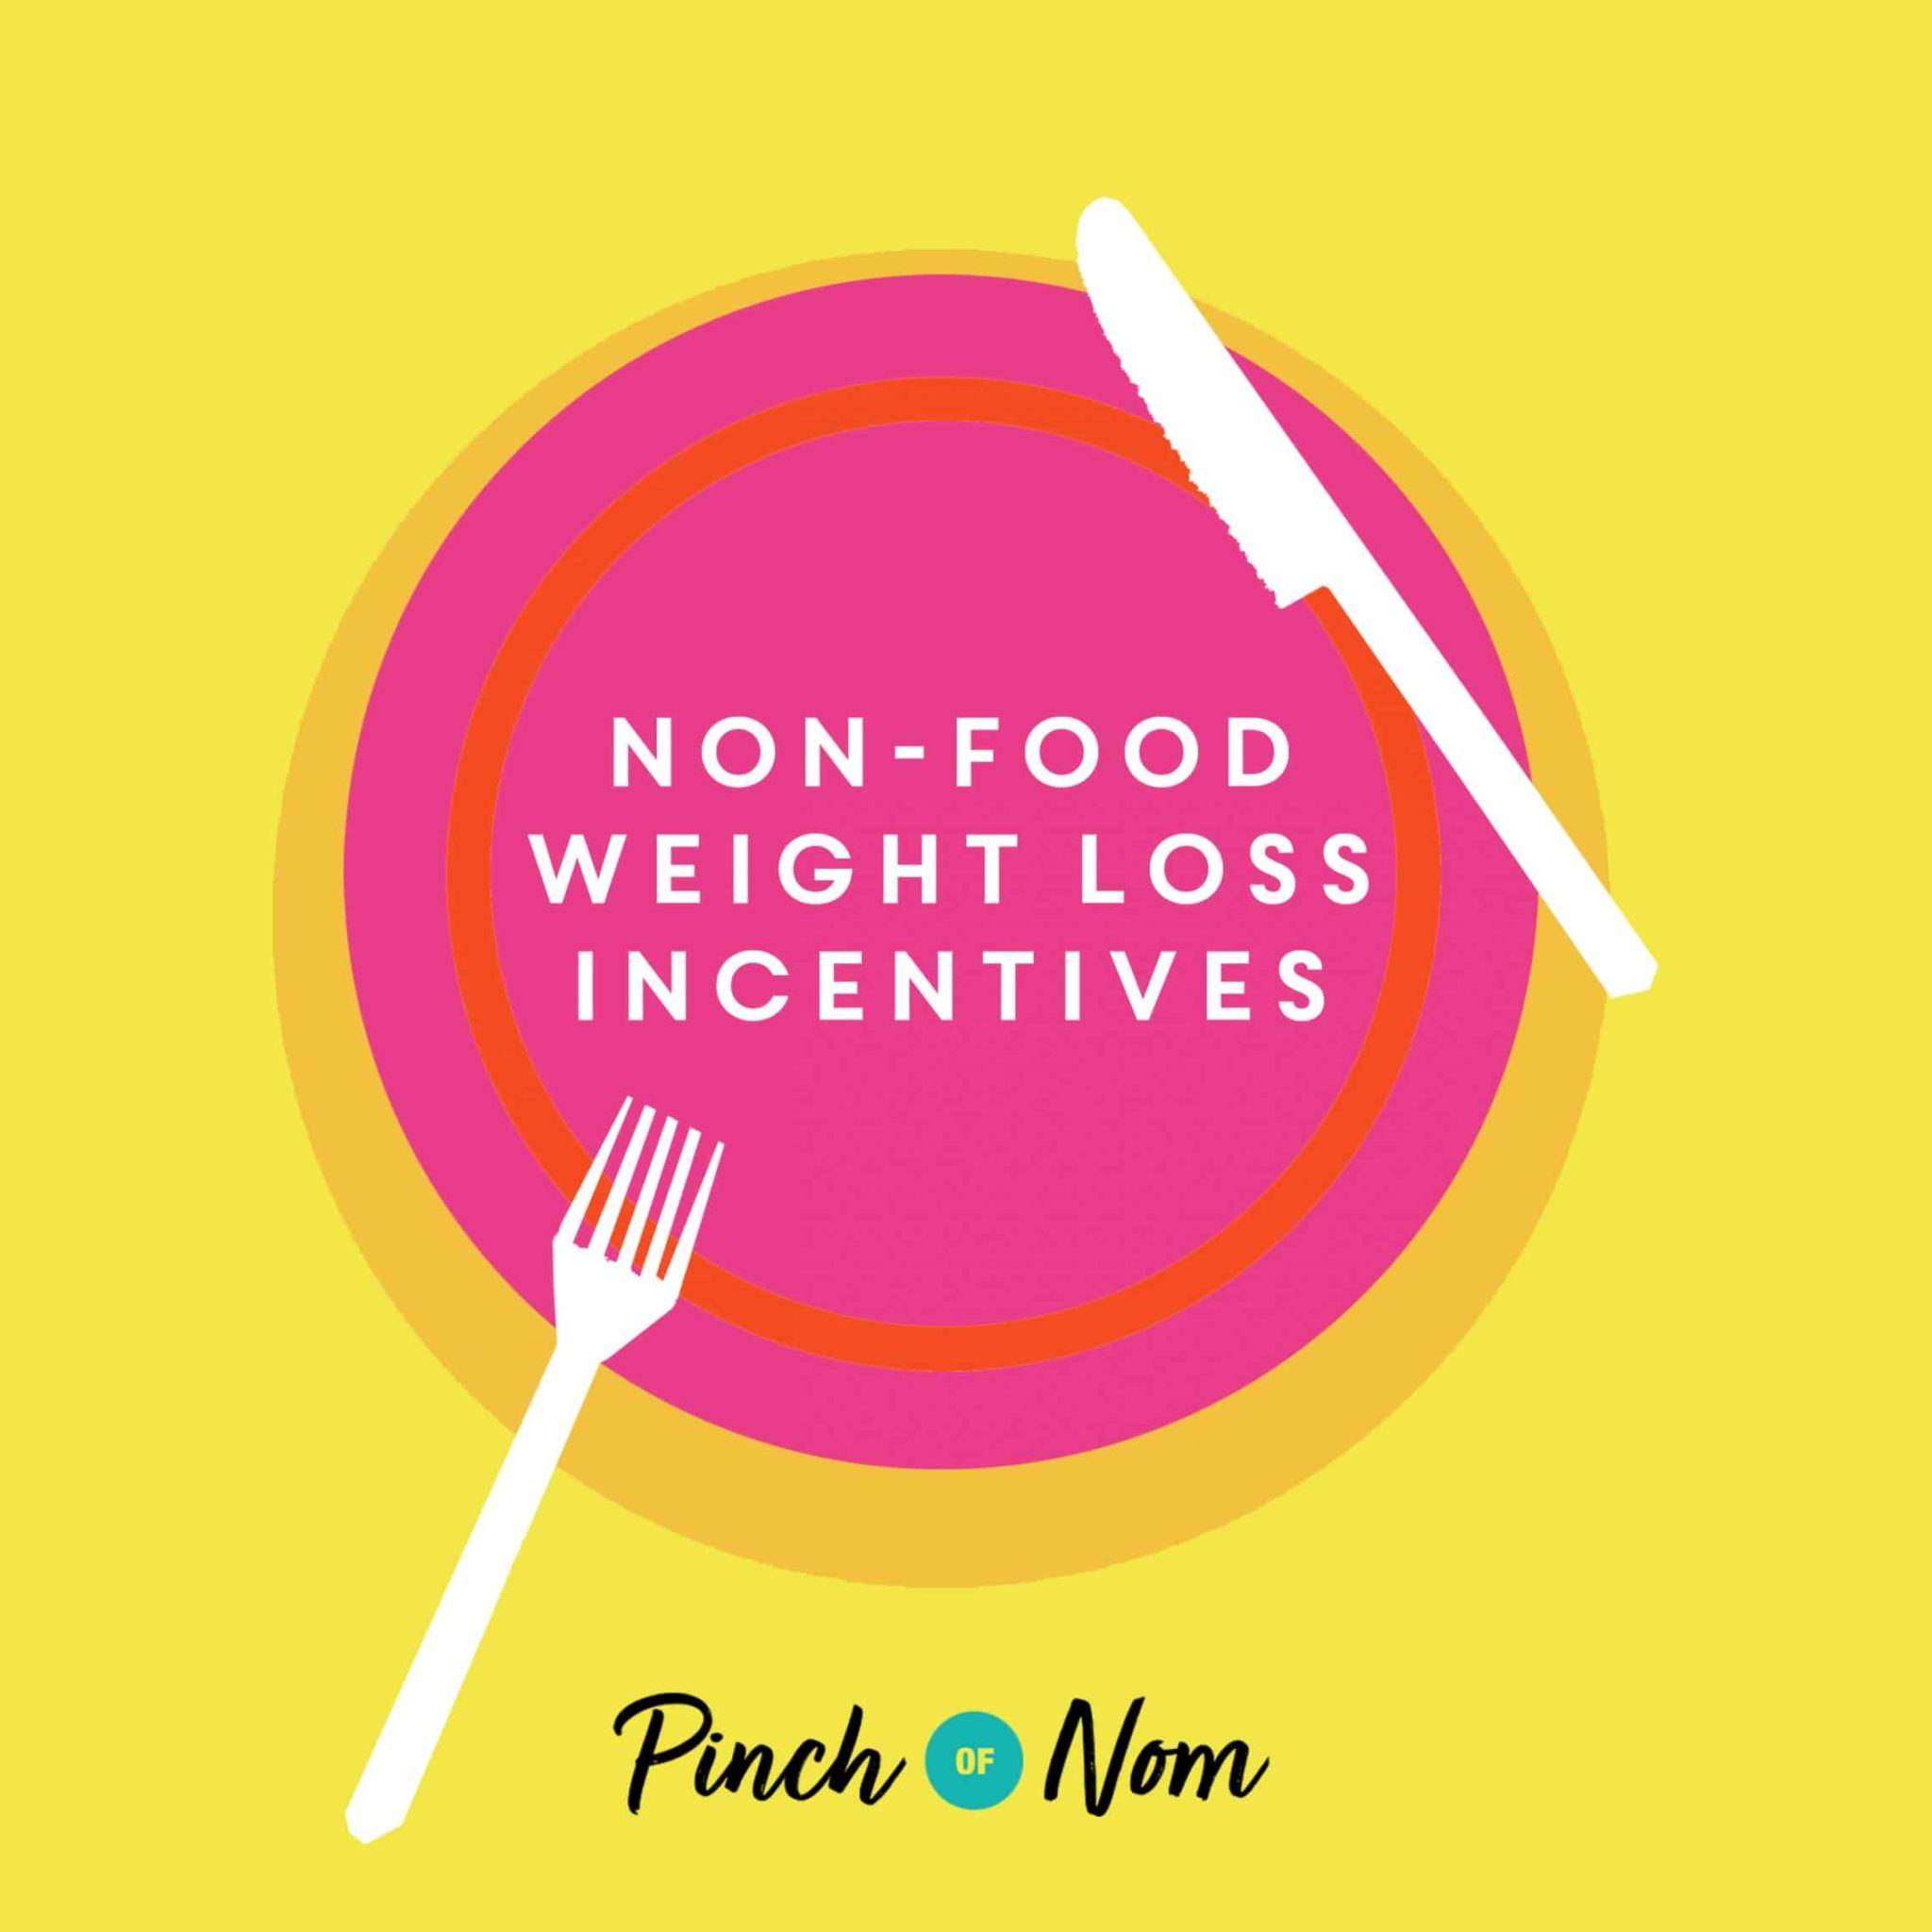 Non-Food Weight Loss Incentives pinchofnom.com